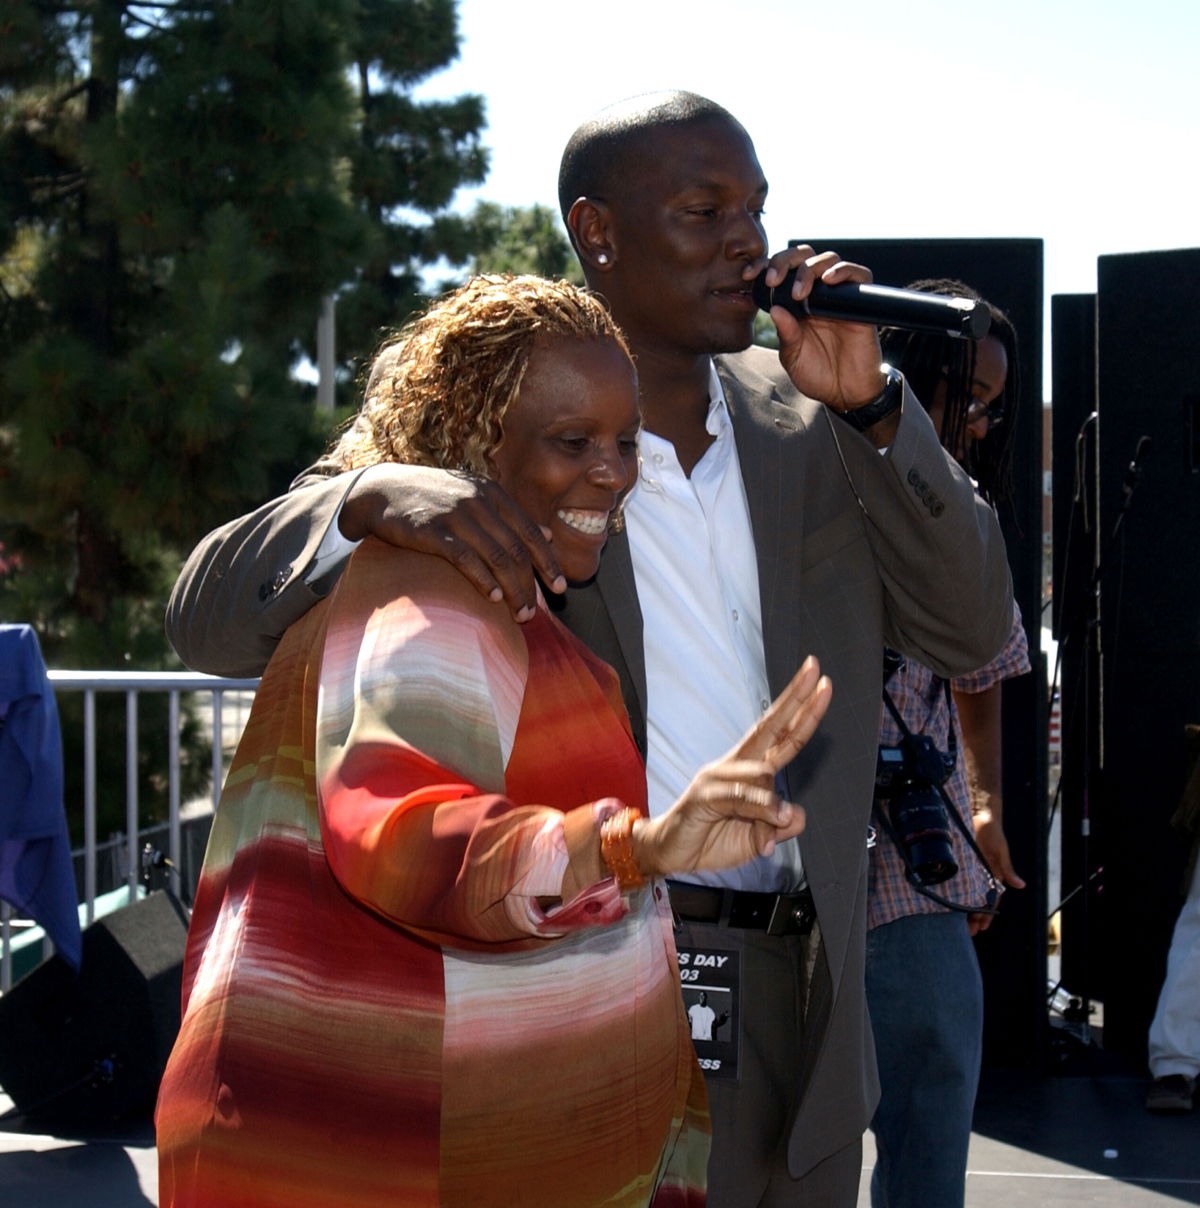 <i>Maury Phillips/Getty Images</i><br/>Tyrese and mom Priscilla Murray during Tyrese Gibson Watts Foundation 3rd Annual Watts Day in 2003. Tyrese Gibson is mourning the death of his mother Priscilla Murray